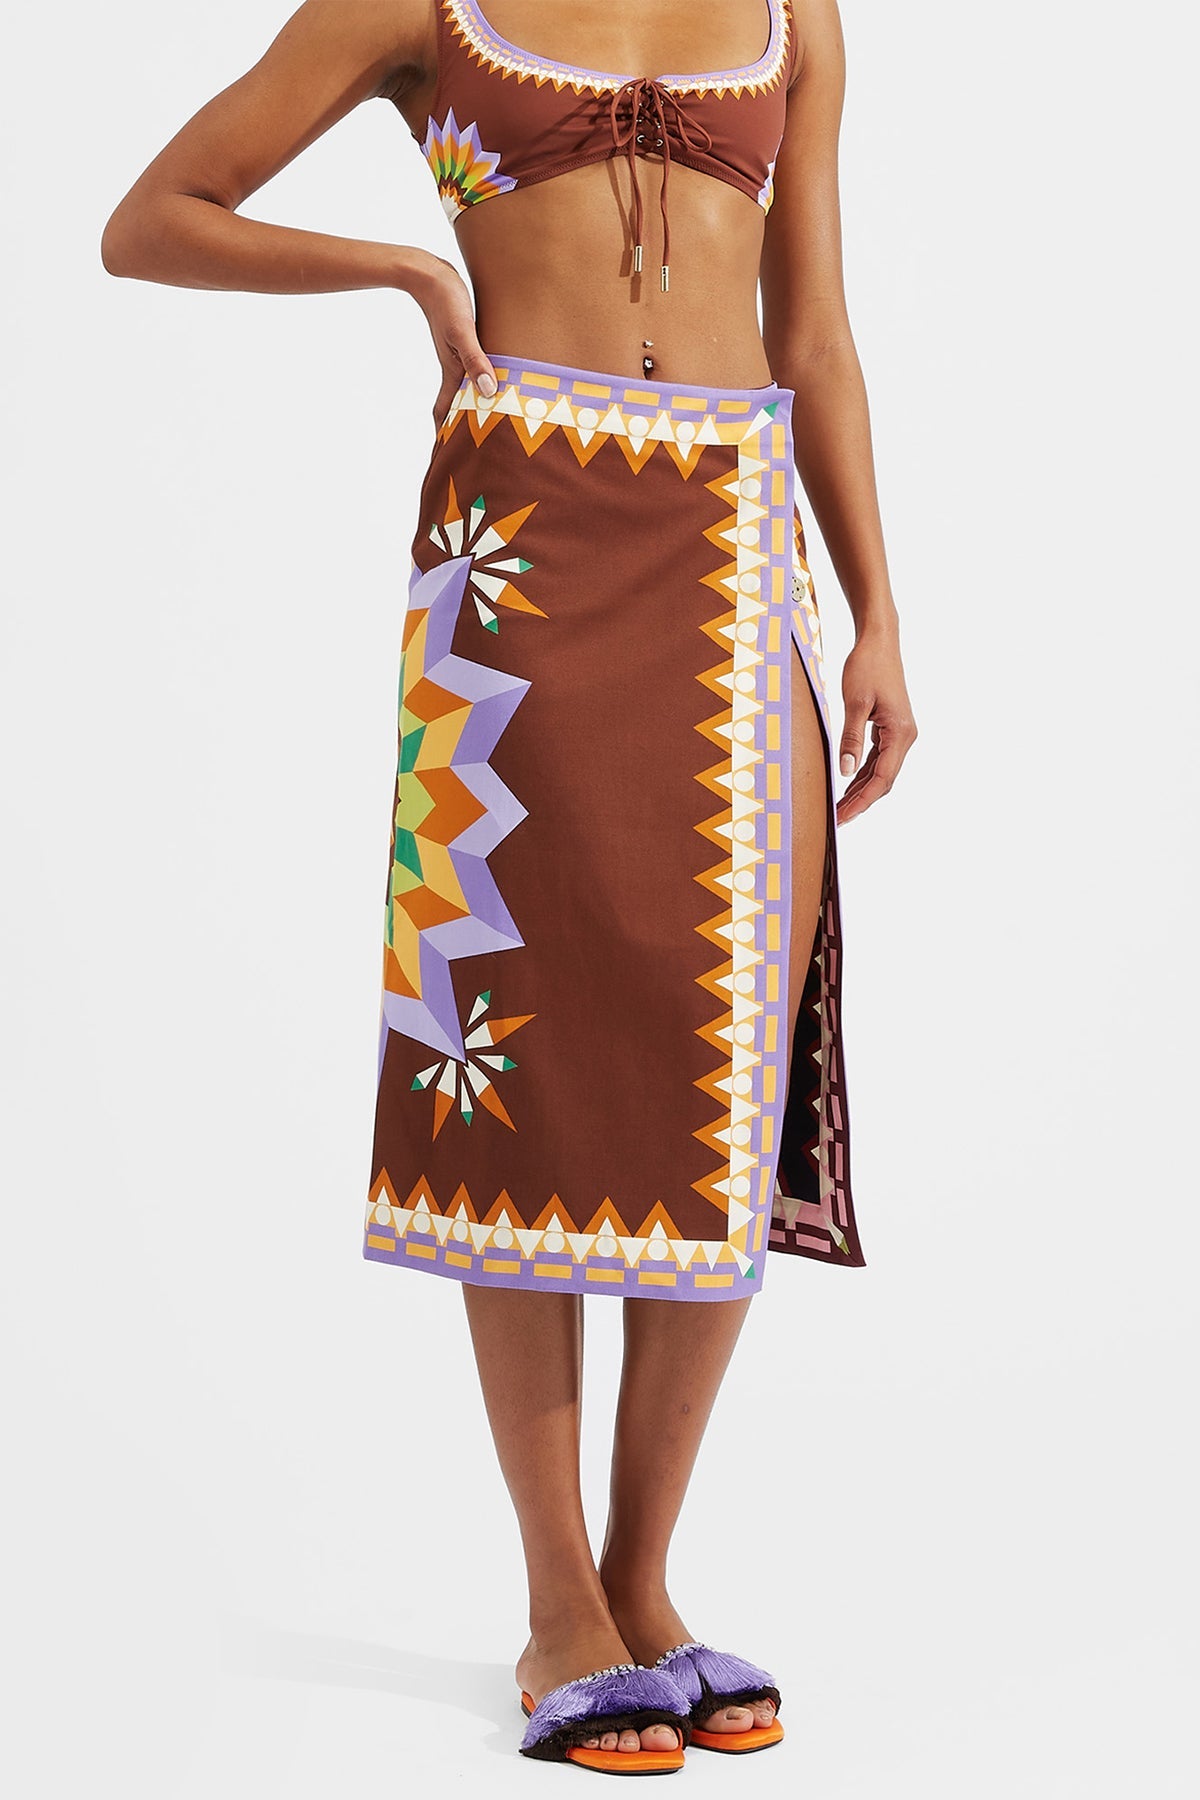 2-Way Pareo Skirt in Sunset Moro Placee - shop-olivia.com